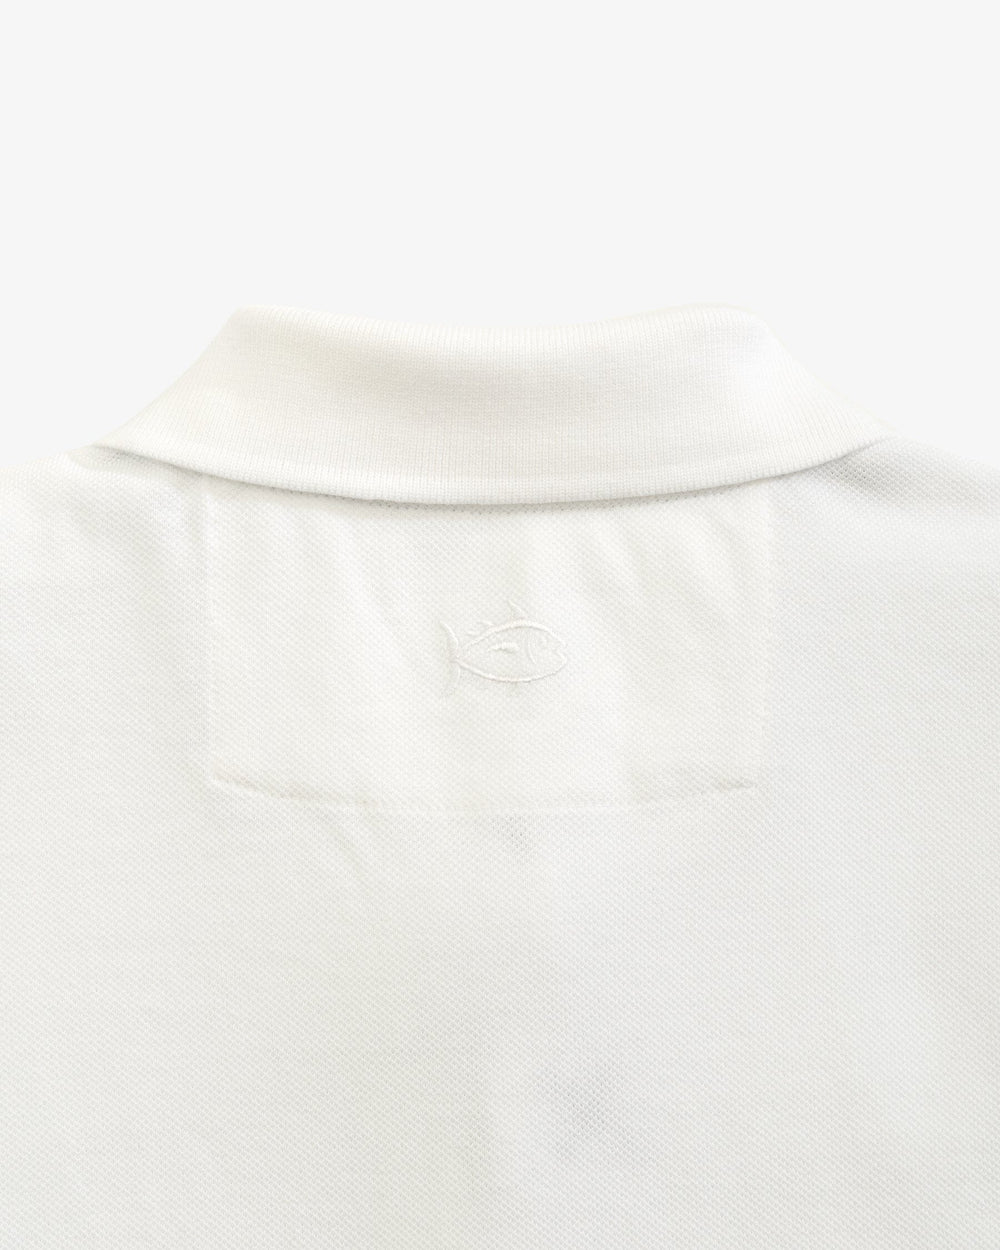 The yoke view of the Vanderbilt Commodores Skipjack Polo by Southern Tide - Classic White